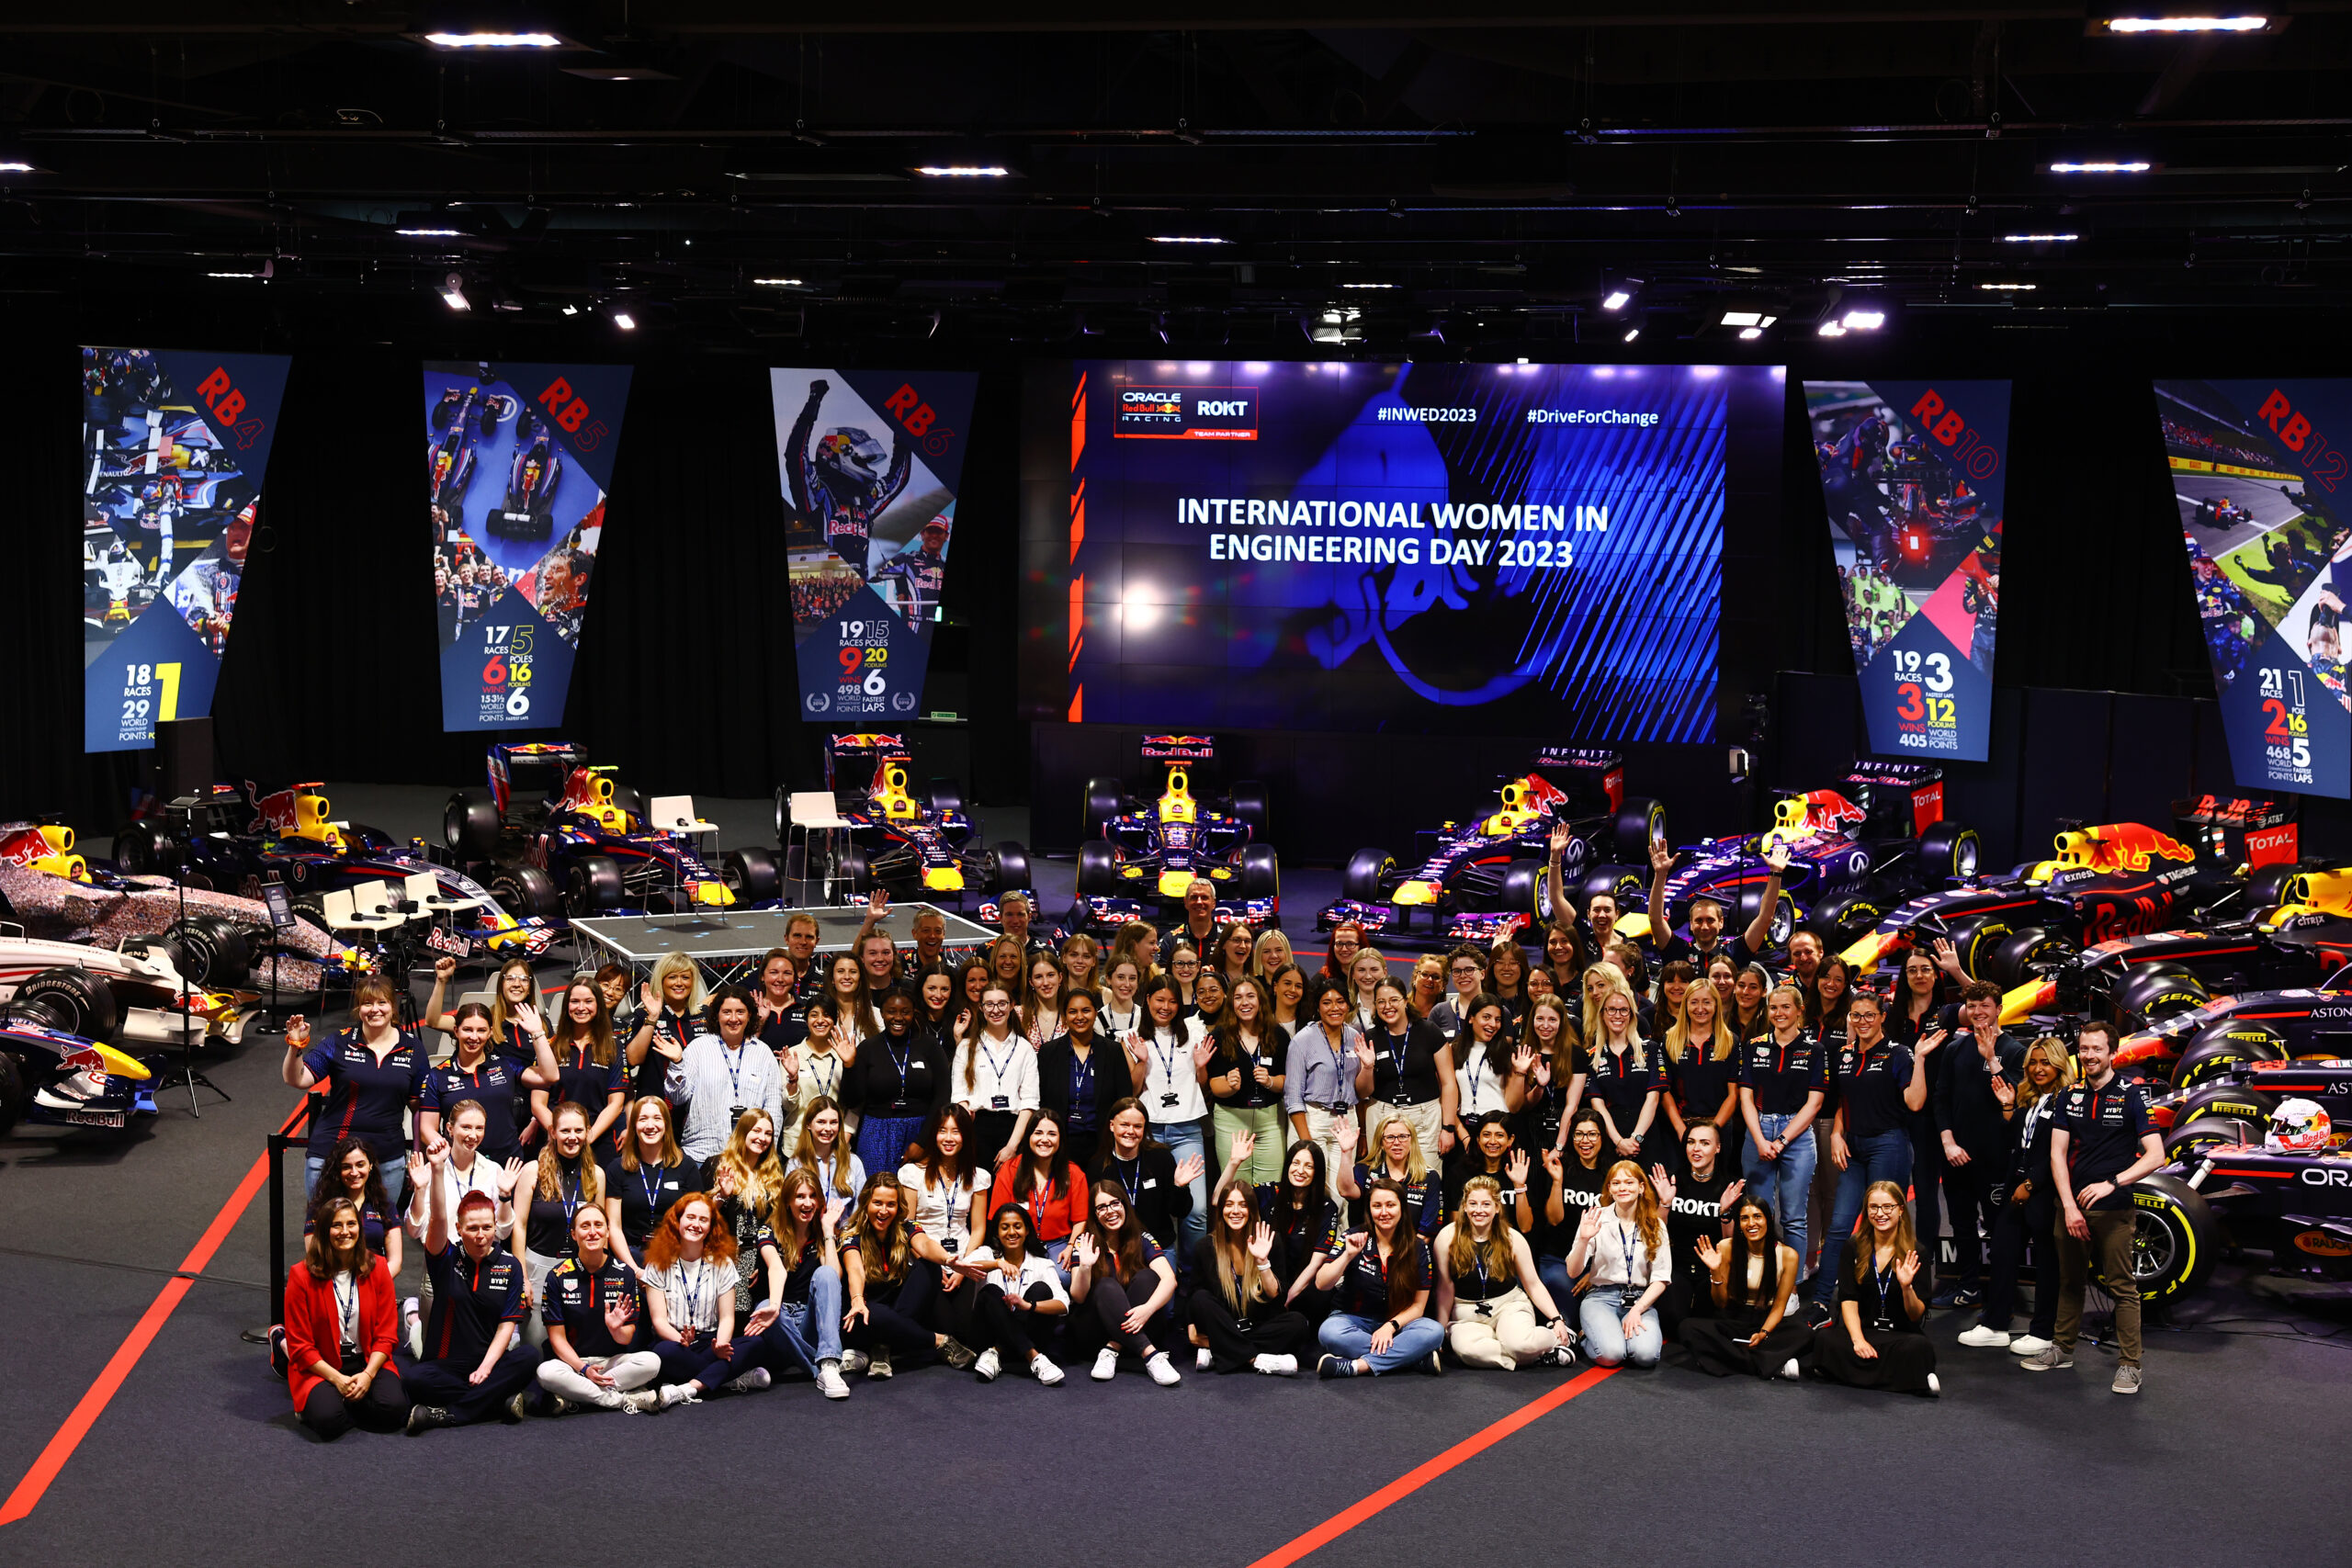 Oracle Red Bull Racing and Rokt launch talent search for female F1 sim racers